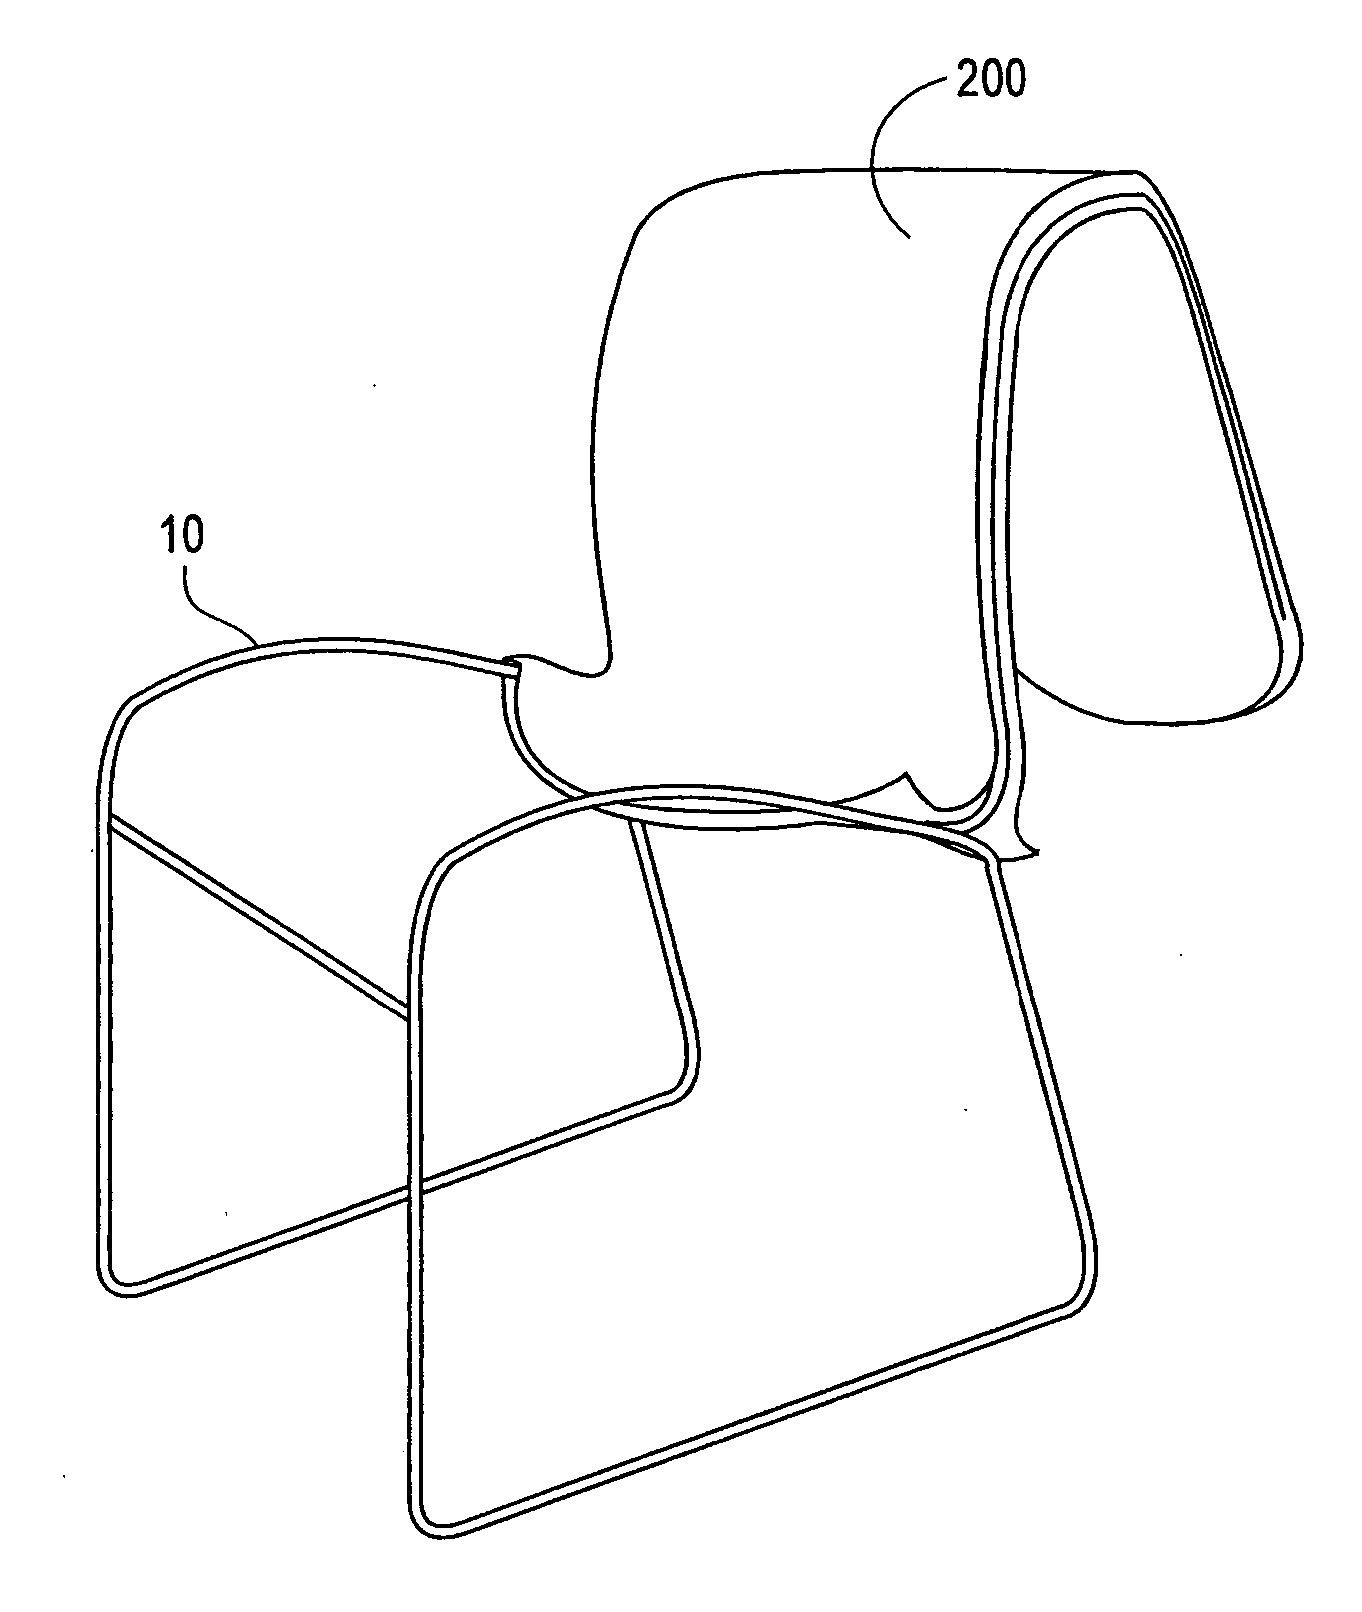 Method of forming a furniture article using heat-shrinkable material, and article formed therefrom